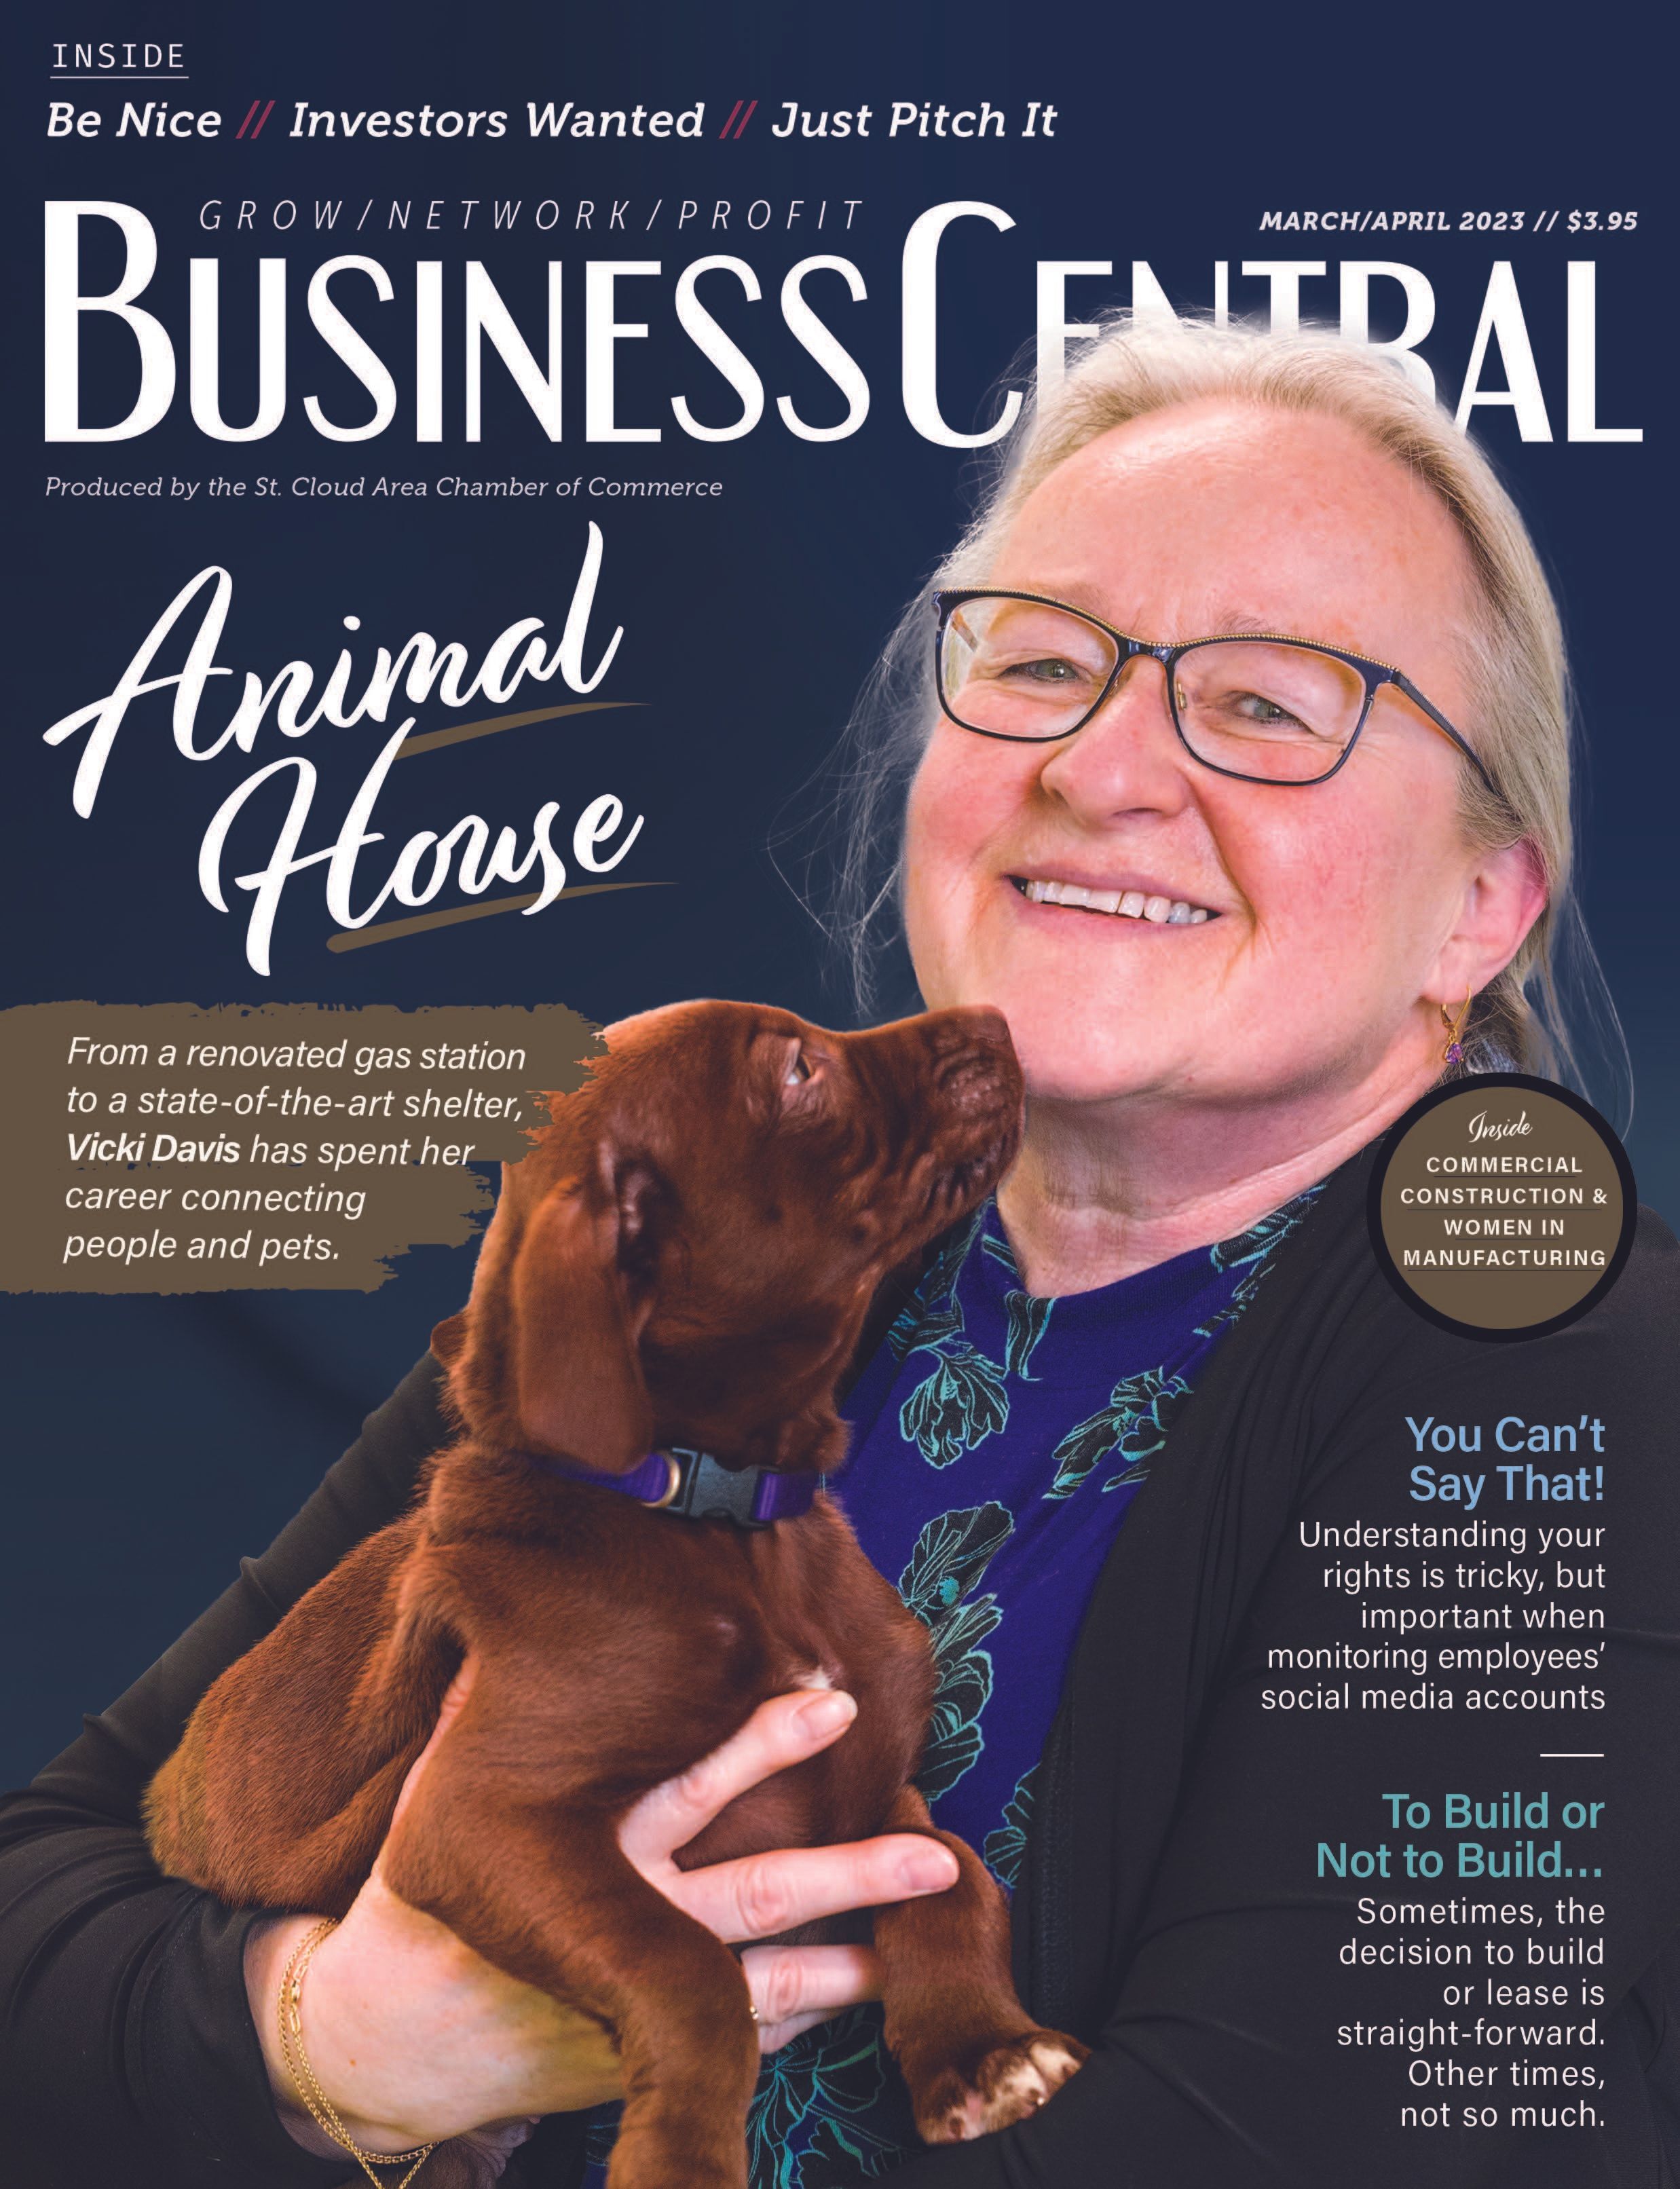 Vicki Davis and Tri-County Humane Society featured in Business Central Magazine